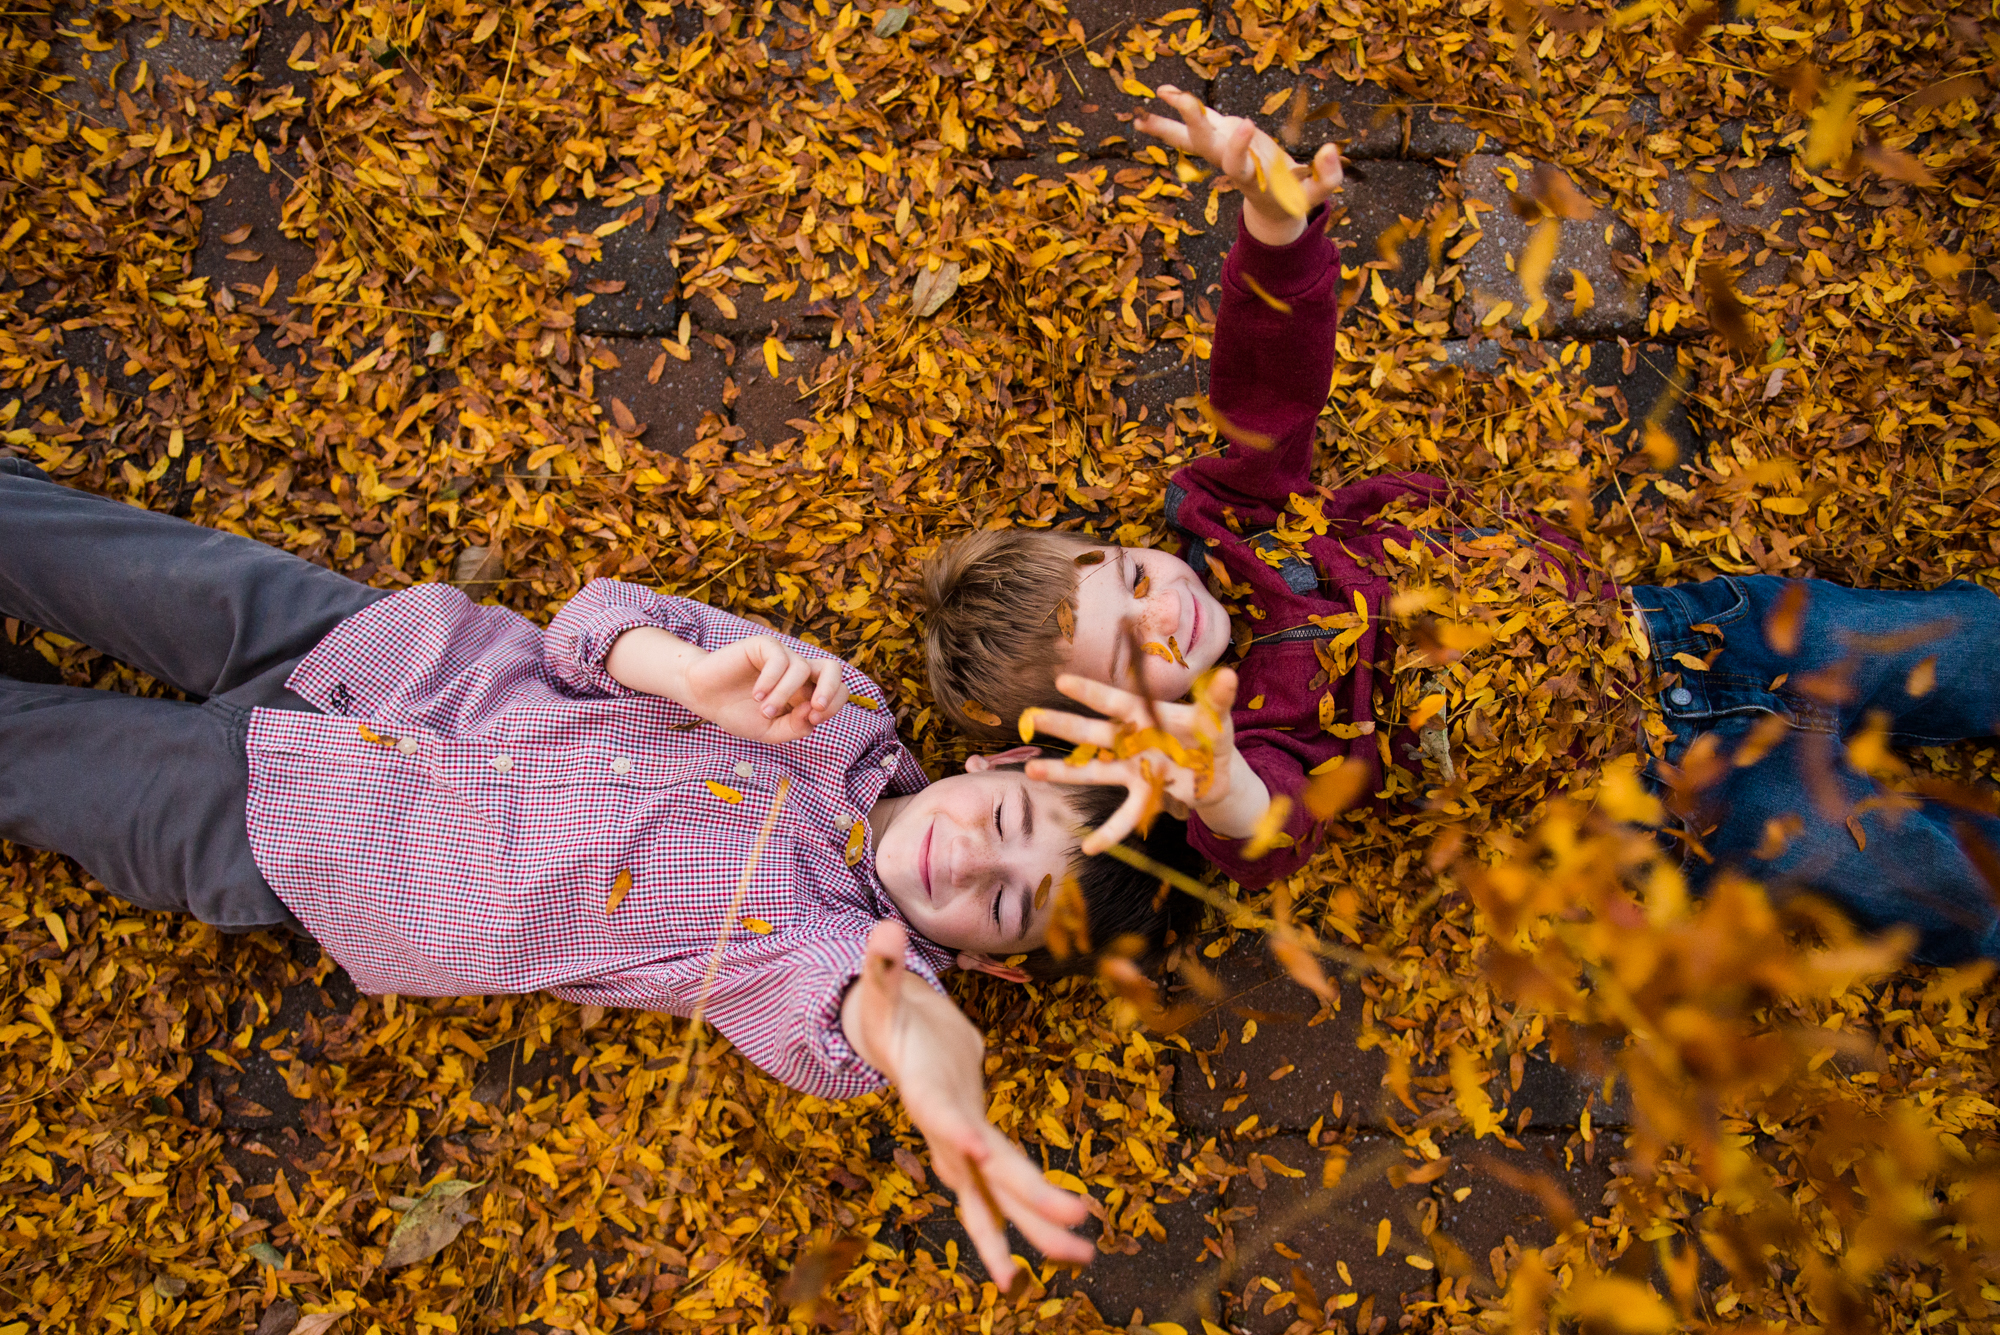 Two boy lay in fall leaves while tossing them into the air during a family photo session